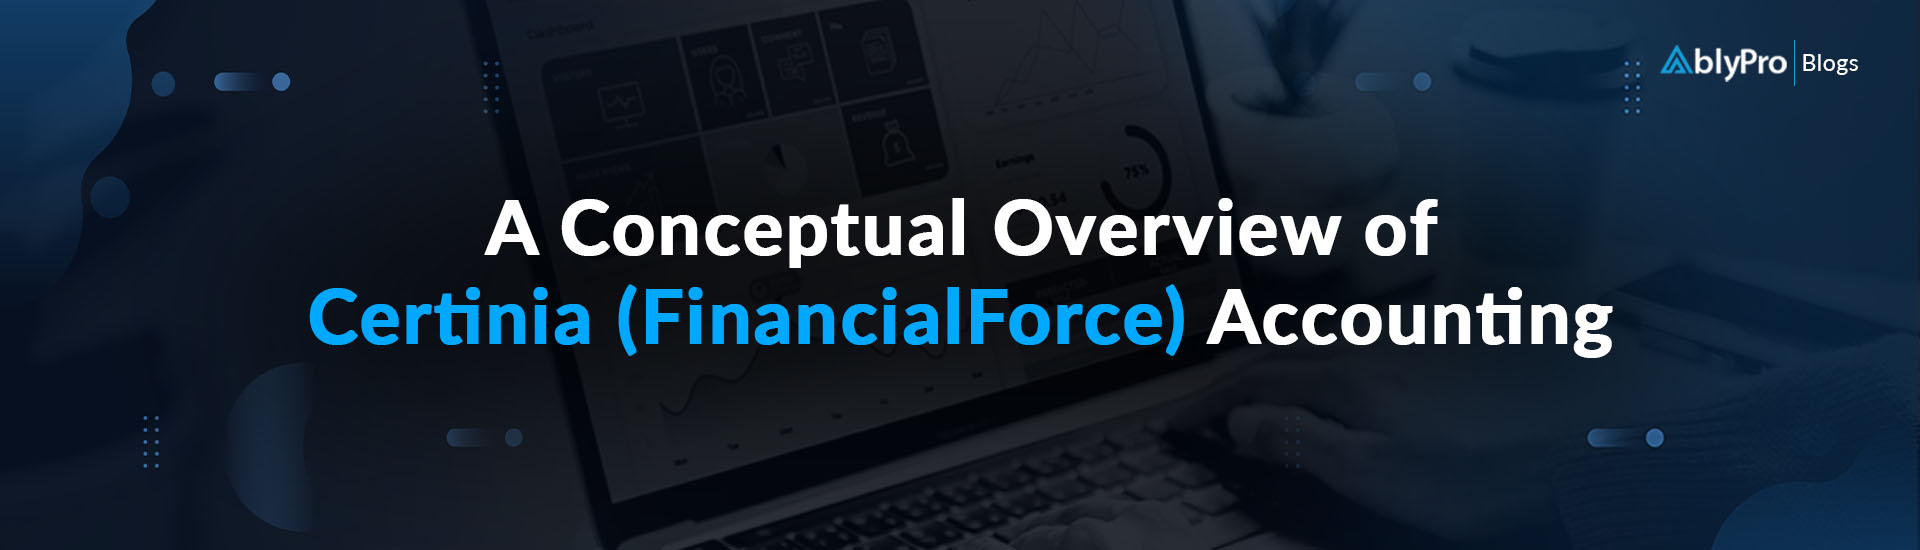 Overview of Certinia FinancialForce Accounting